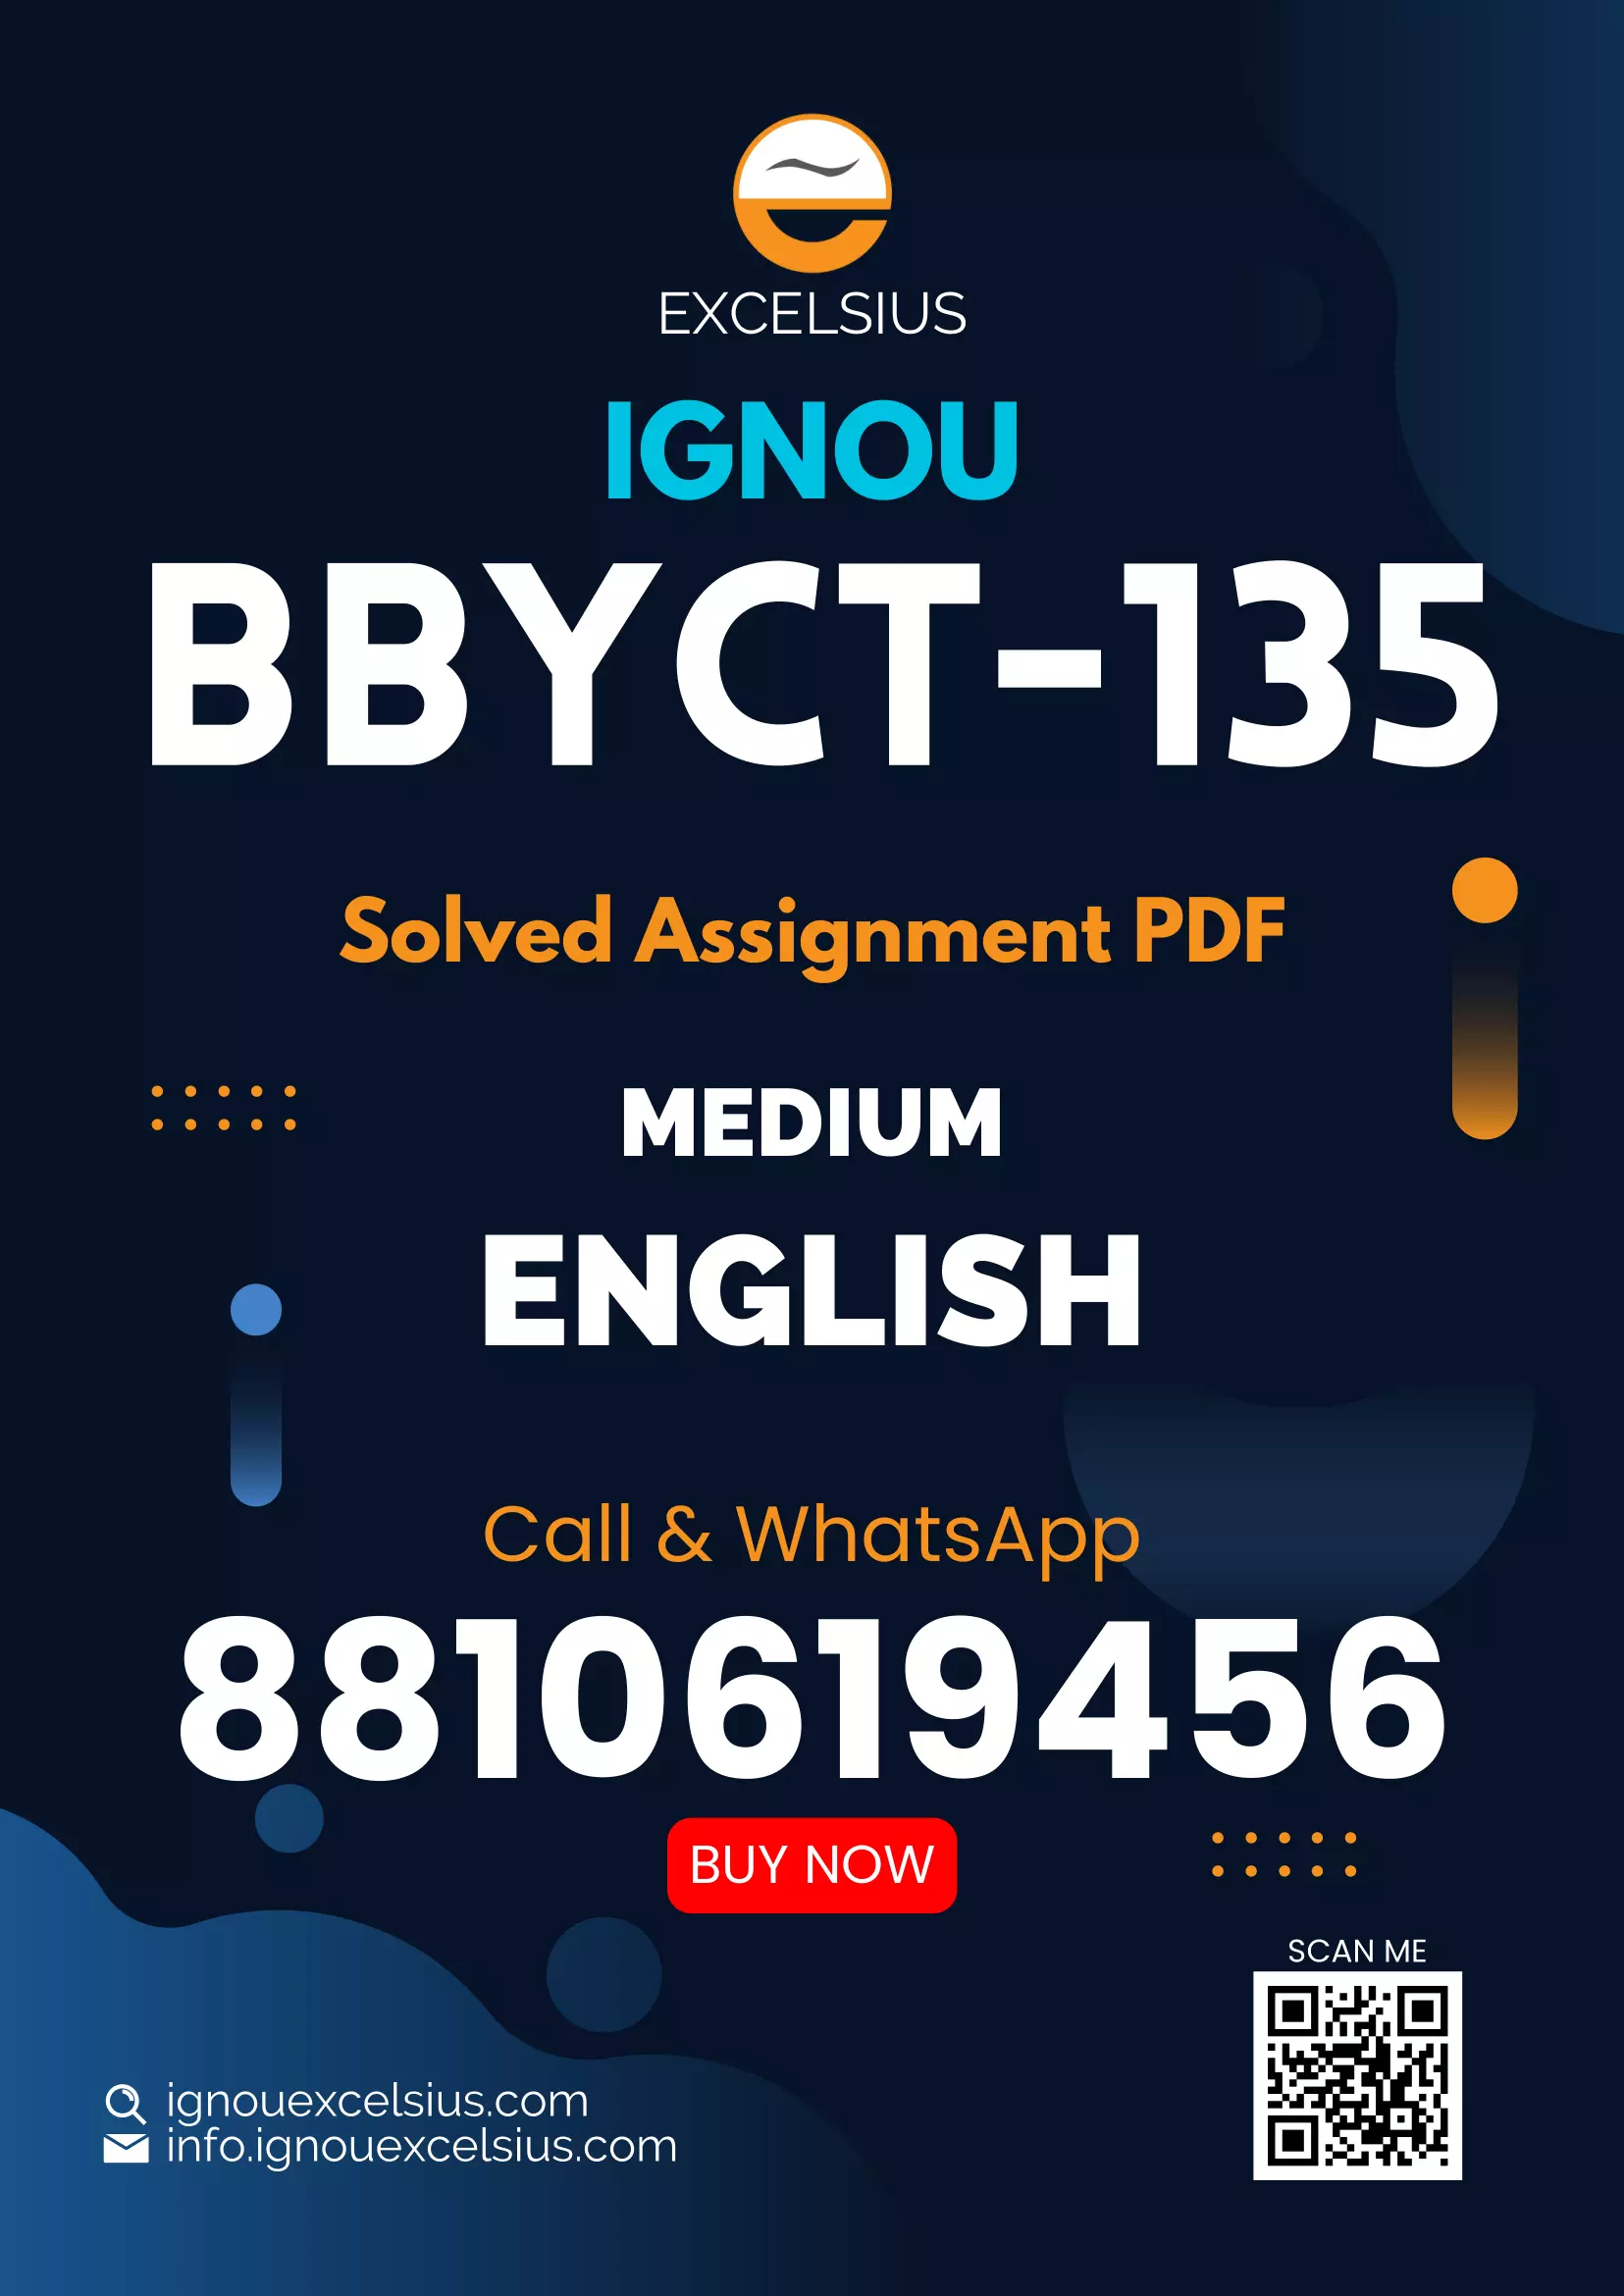 IGNOU BBYCT-135 - Plant Anatomy and Embryology, Latest Solved Assignment-January 2023 - December 2023